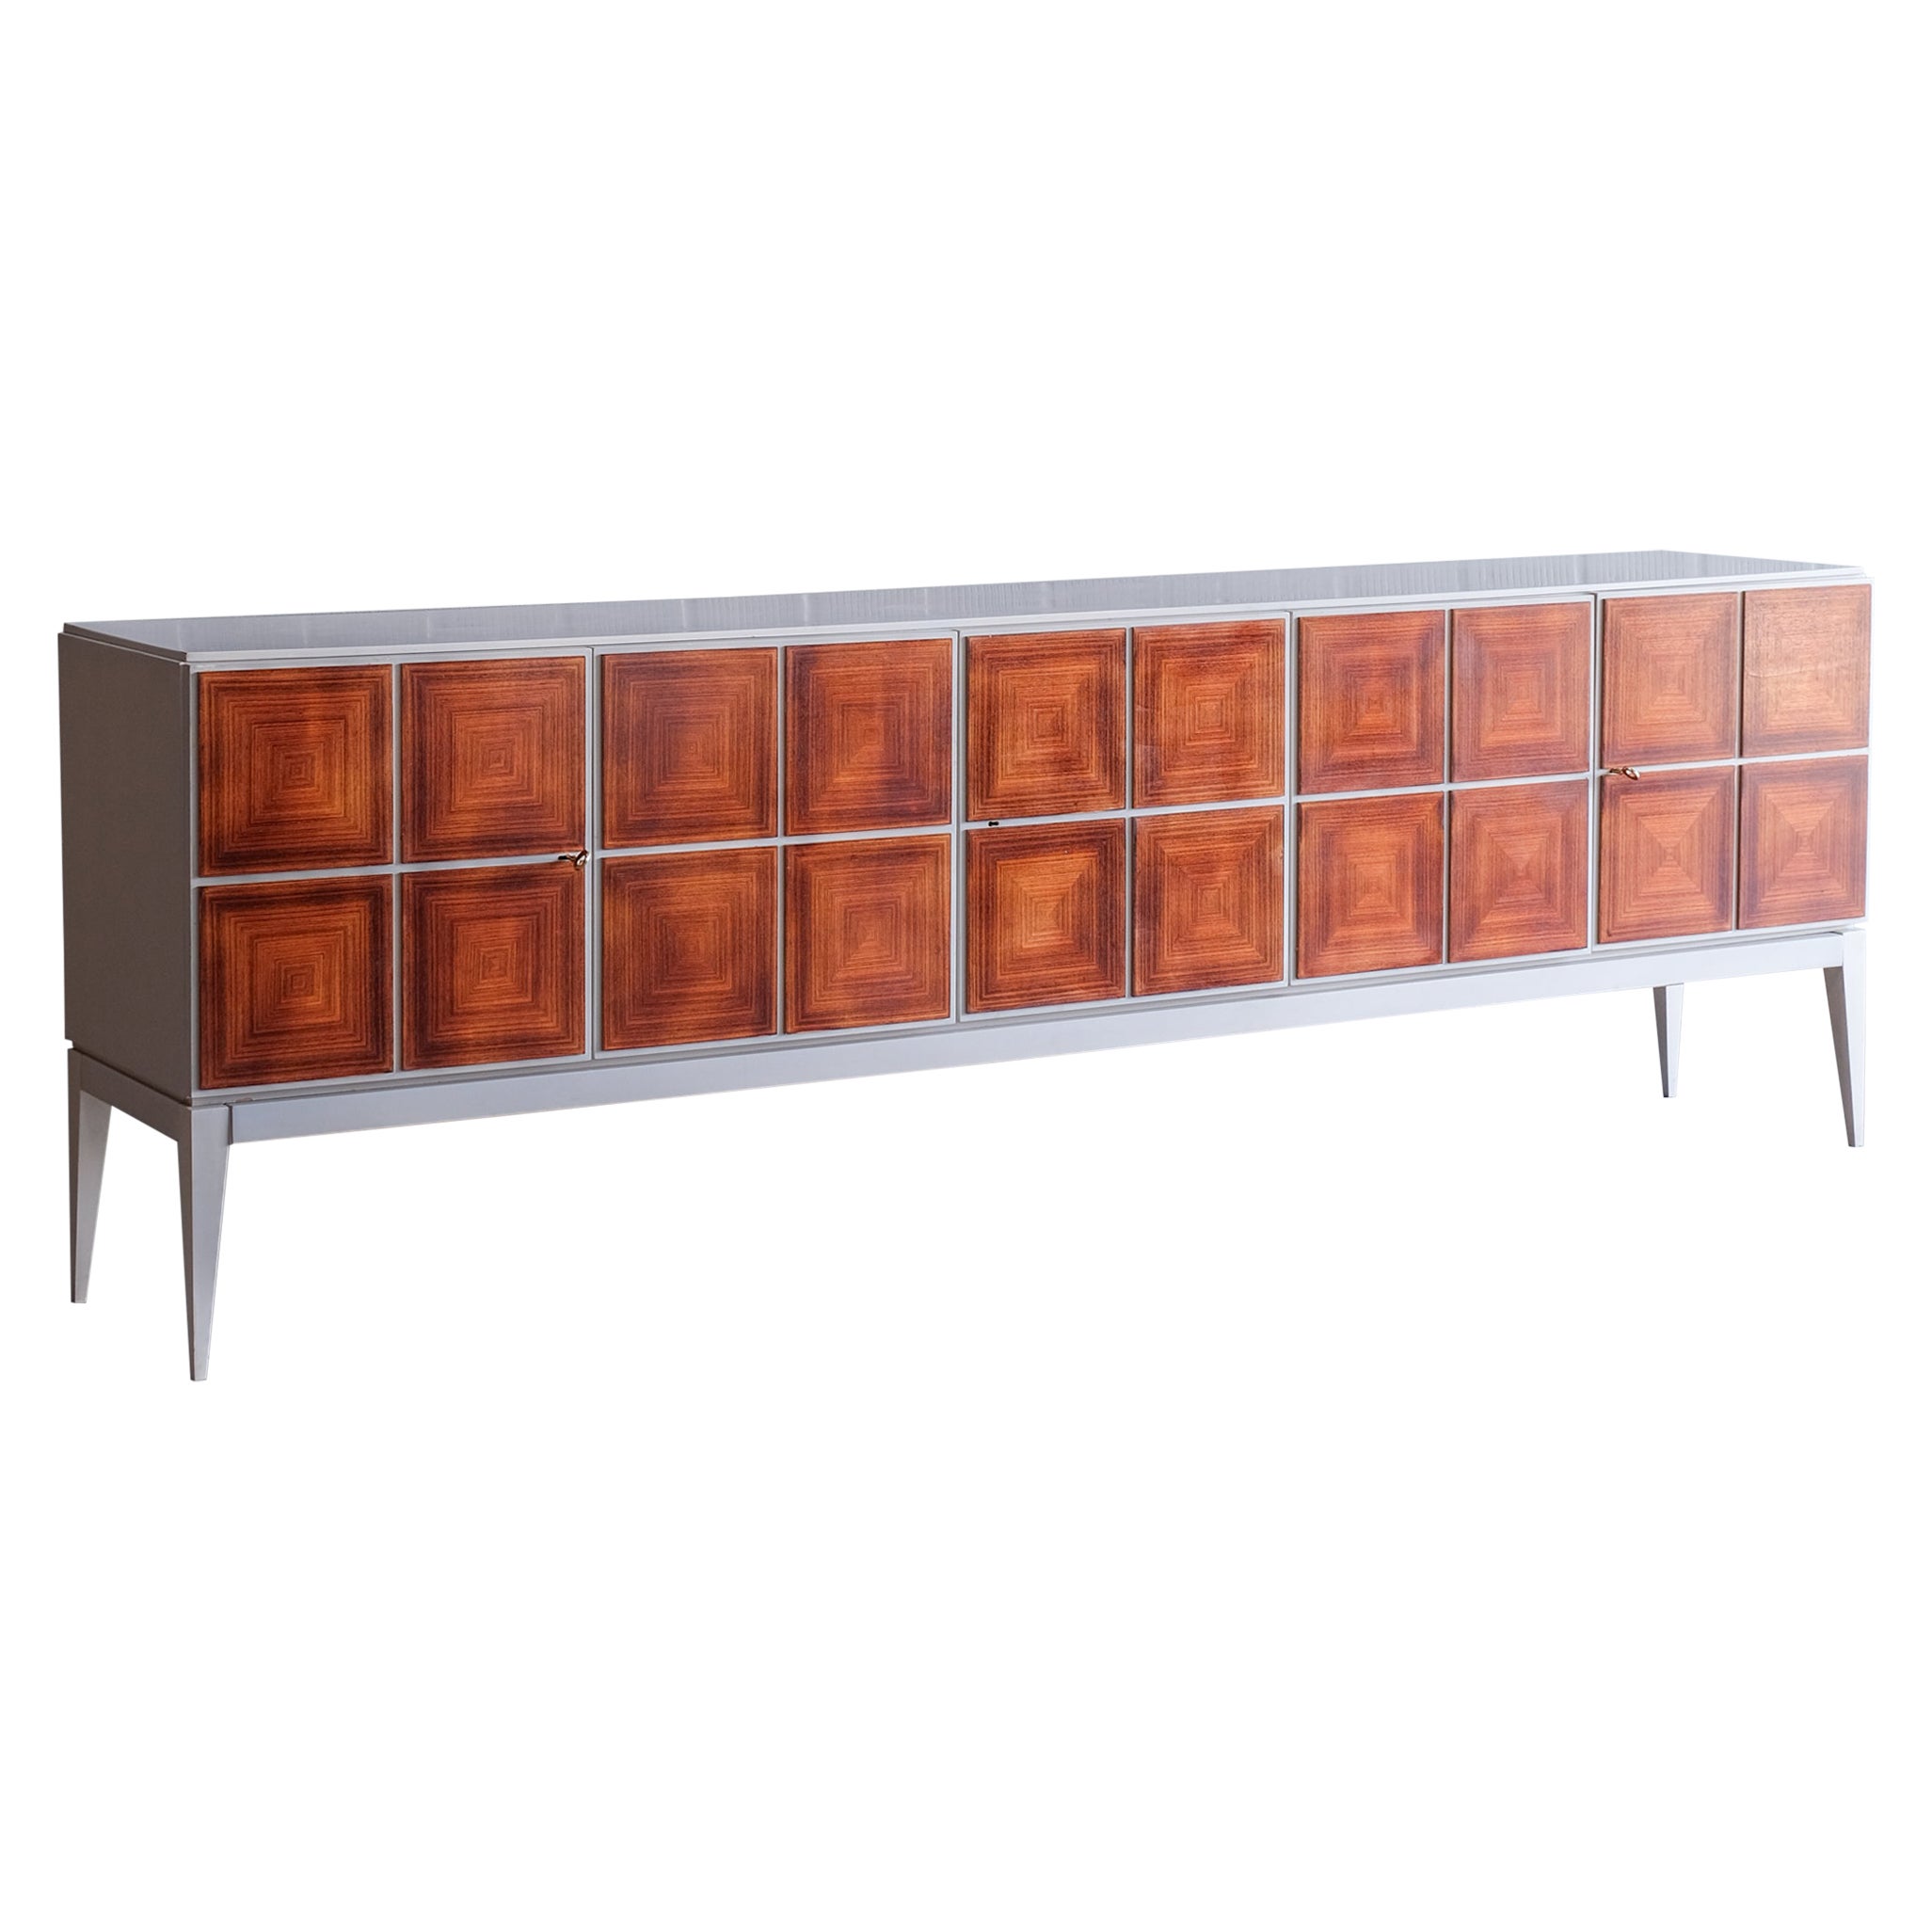 Mid century XL sideboard by Musterring Germany 1960s made out of wood